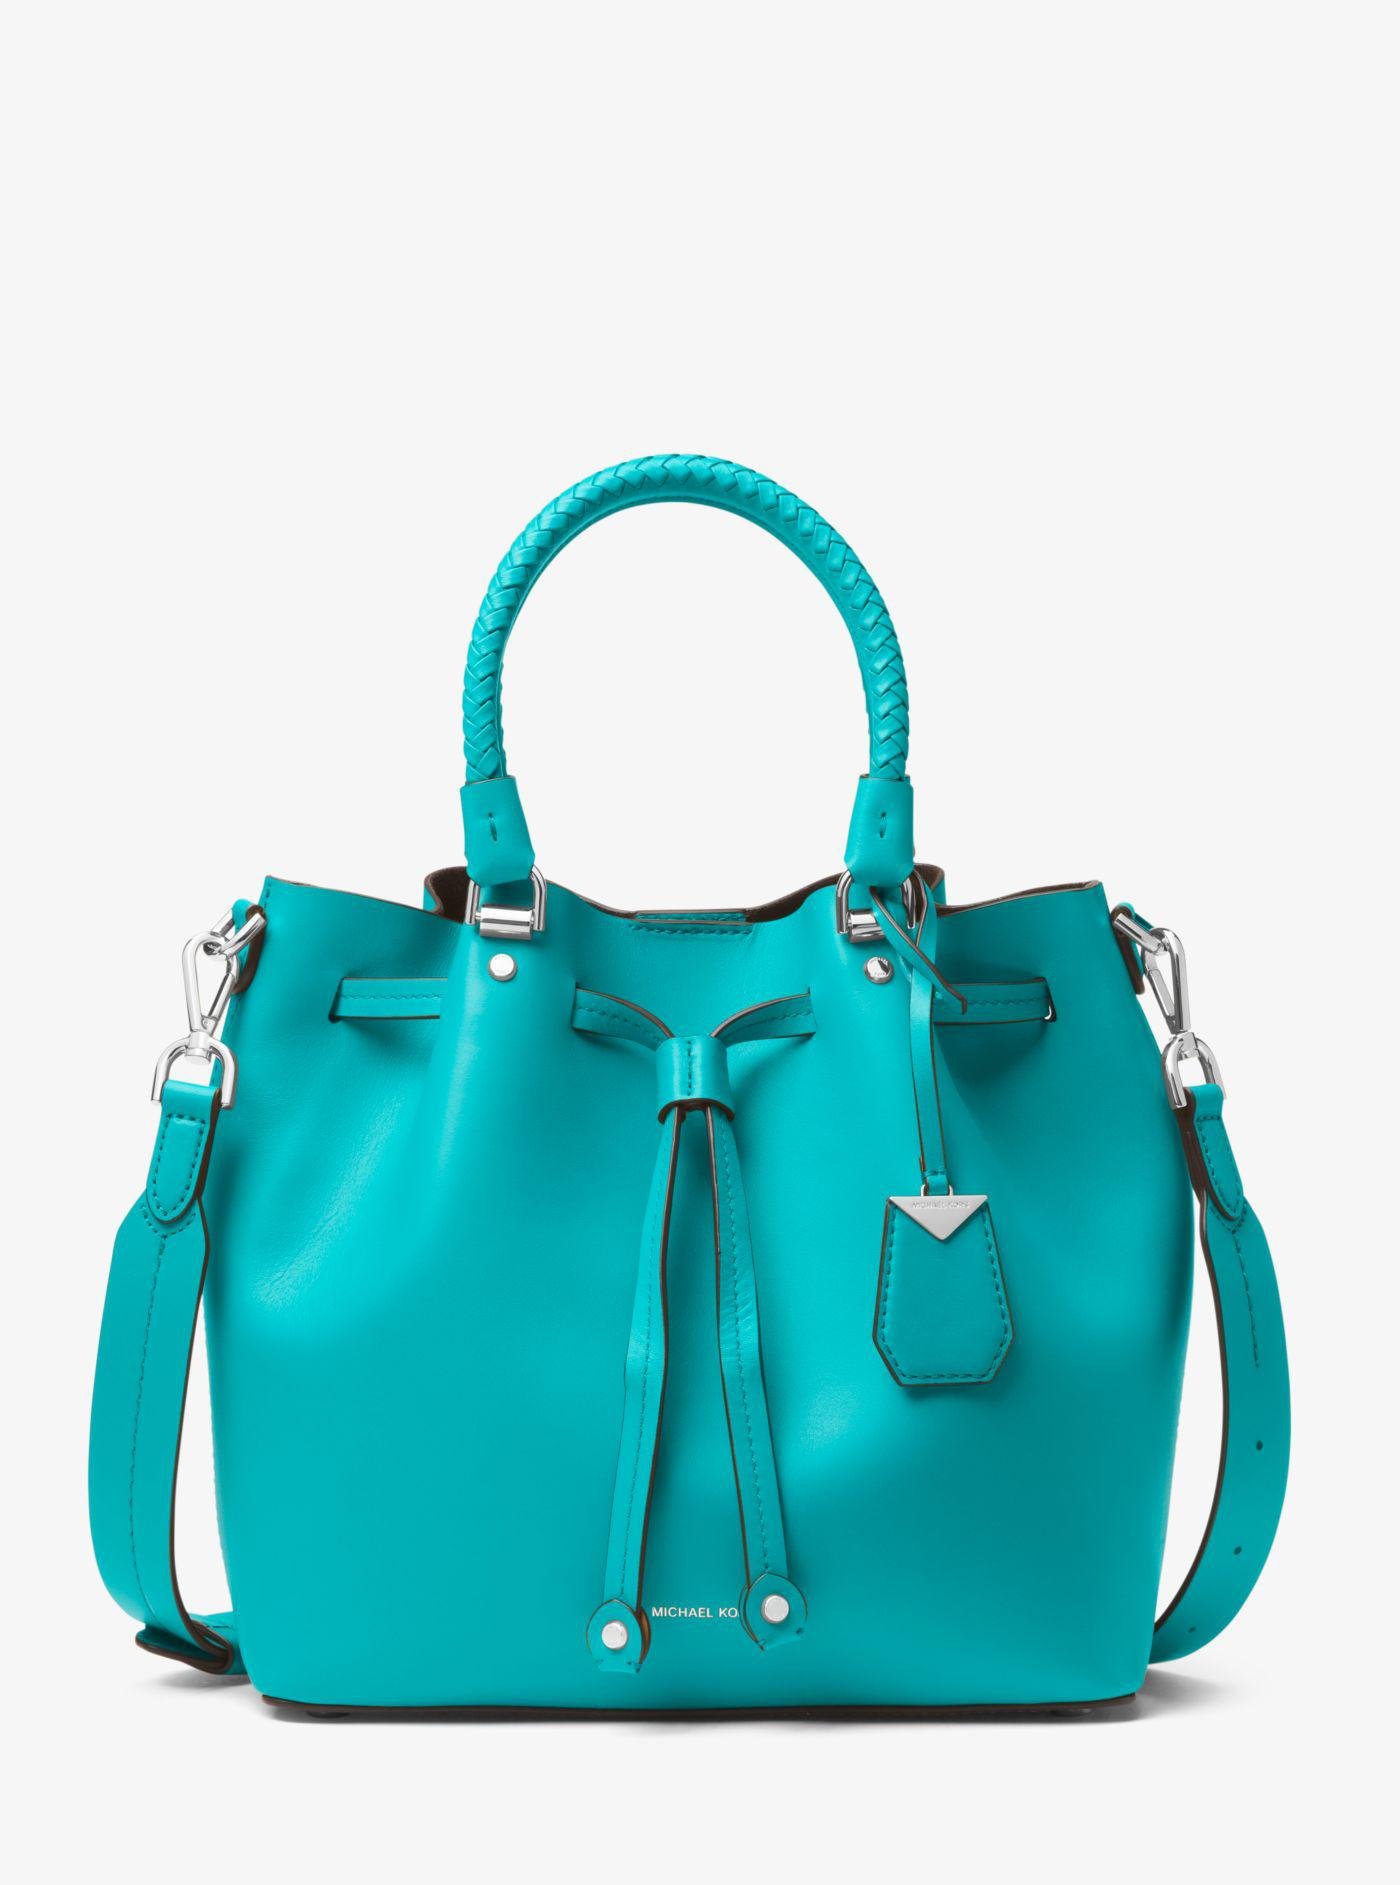 Michael Kors Blakely Leather Bucket Bag in Turquoise (Blue) - Lyst